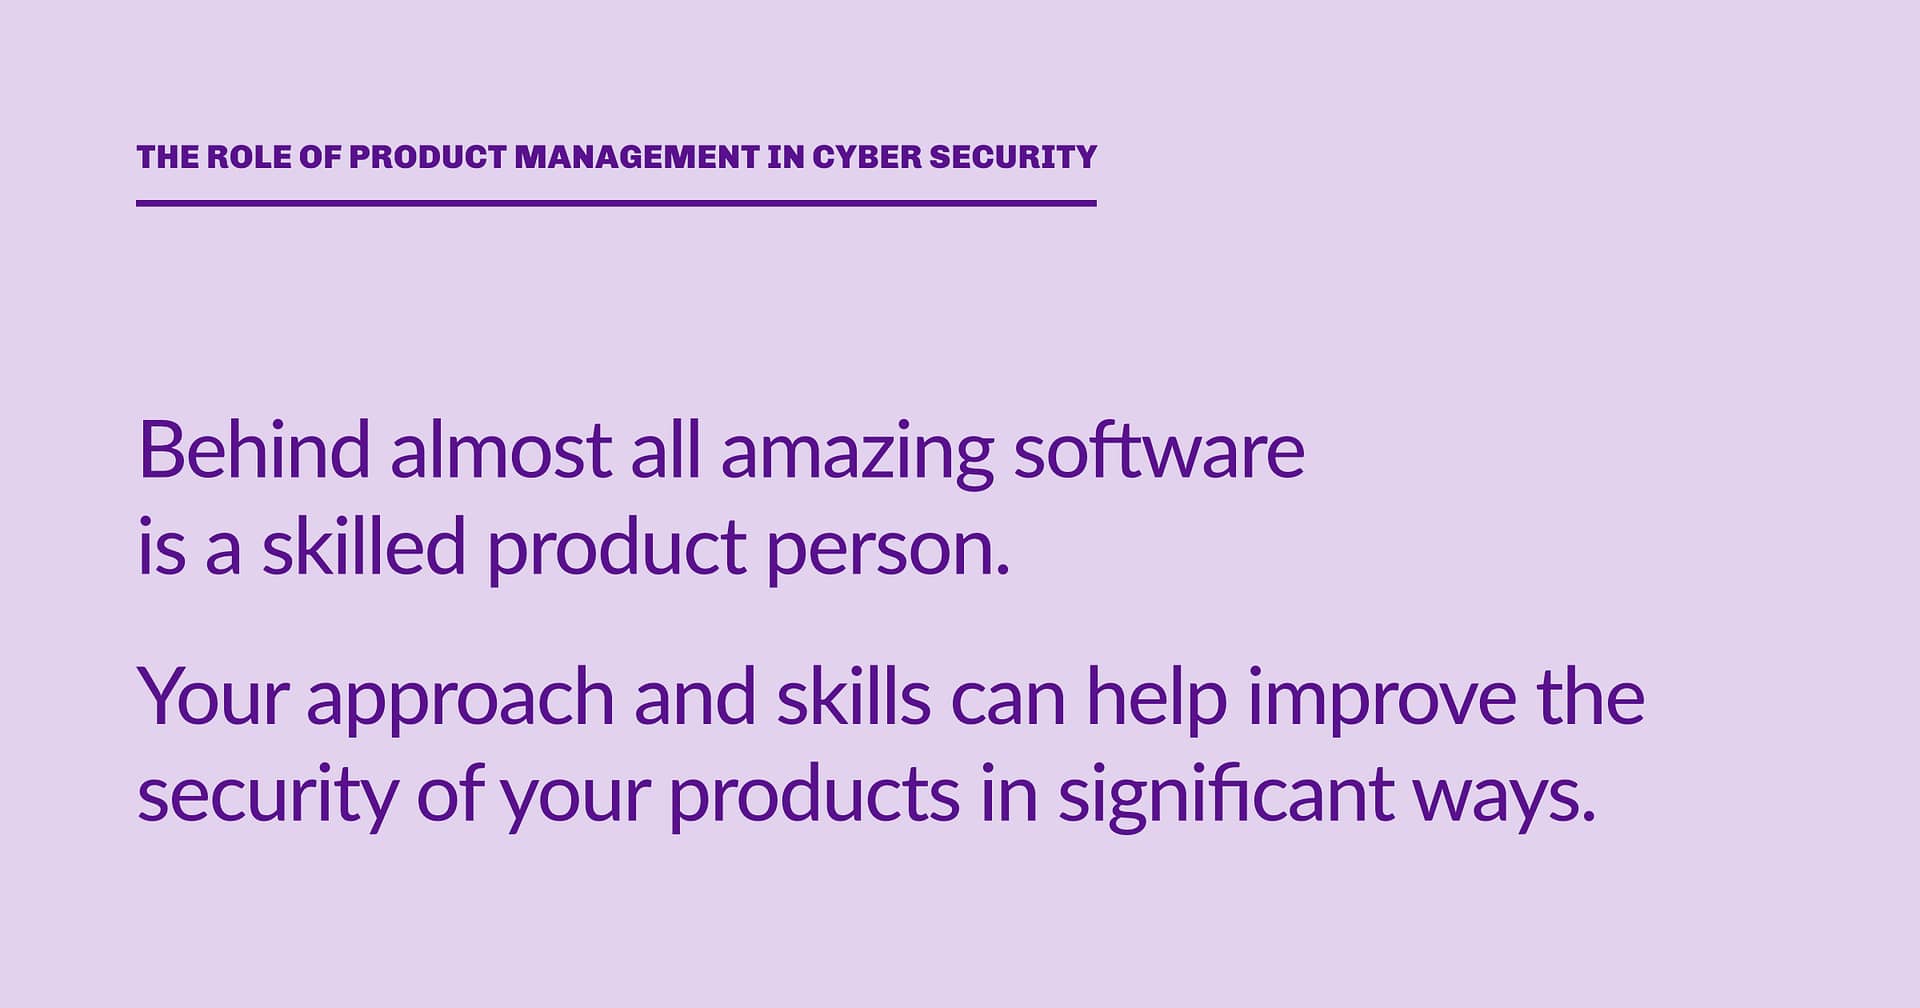 Highlight block: Behind almost all amazing software is a skilled product person. Your approach and skills can help improve the security of your products in significant ways.